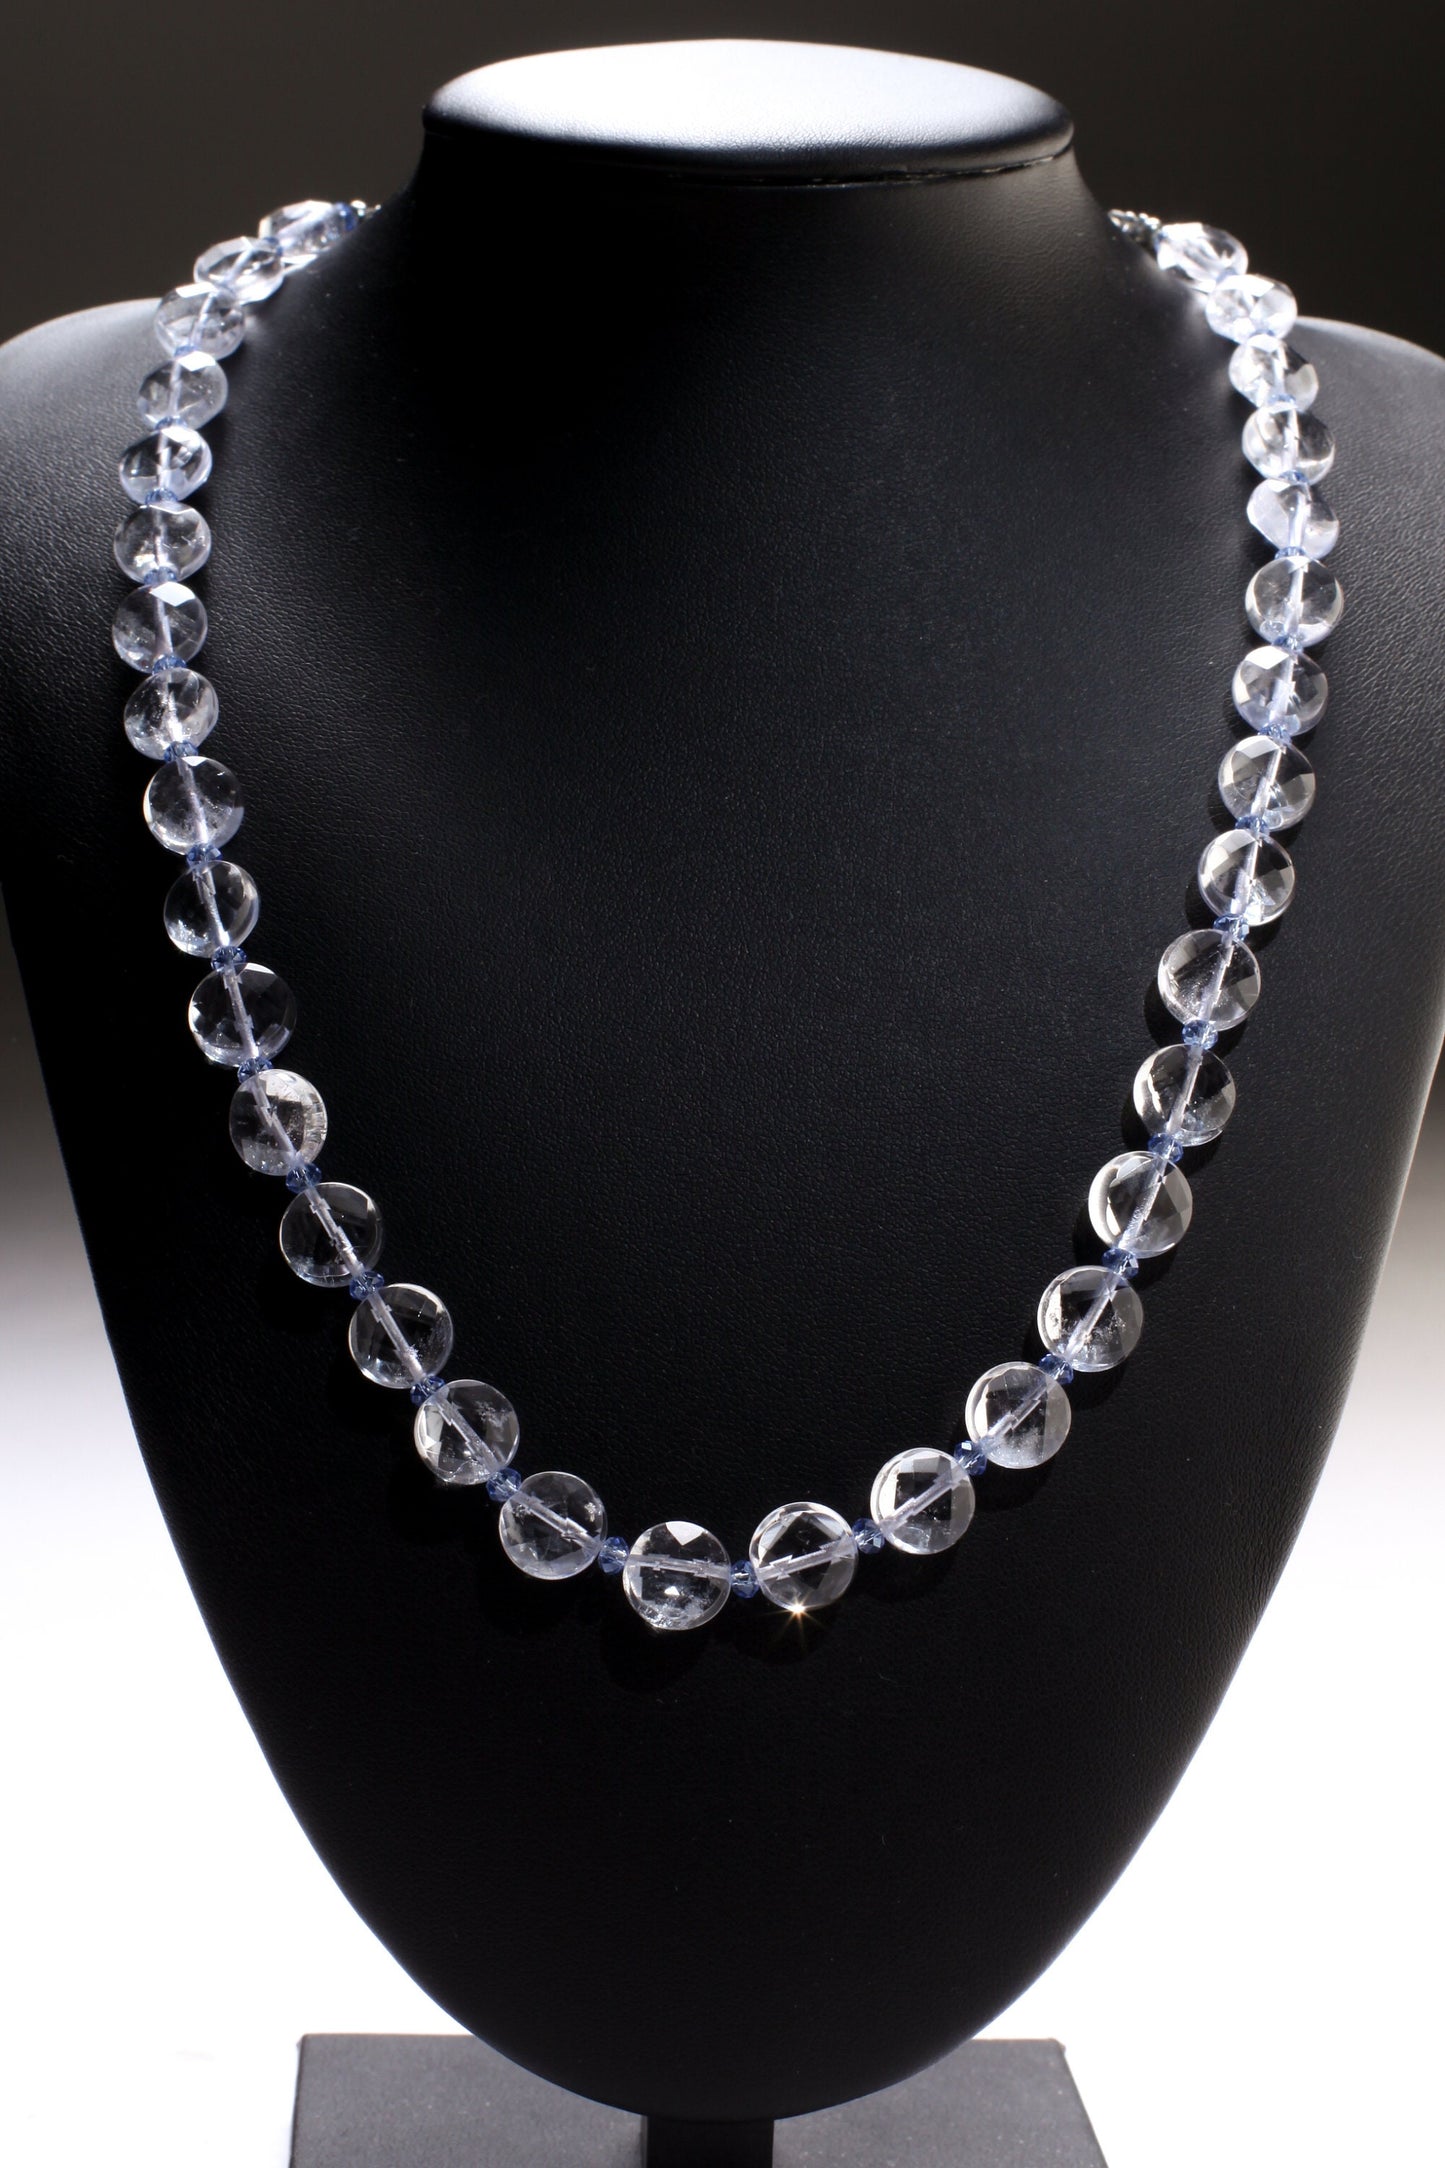 Aquamarine Quartz Faceted 10mm Coin Shape Accented with Crystal Spacers Beads 17.5" Necklace with 3" Extension Chain